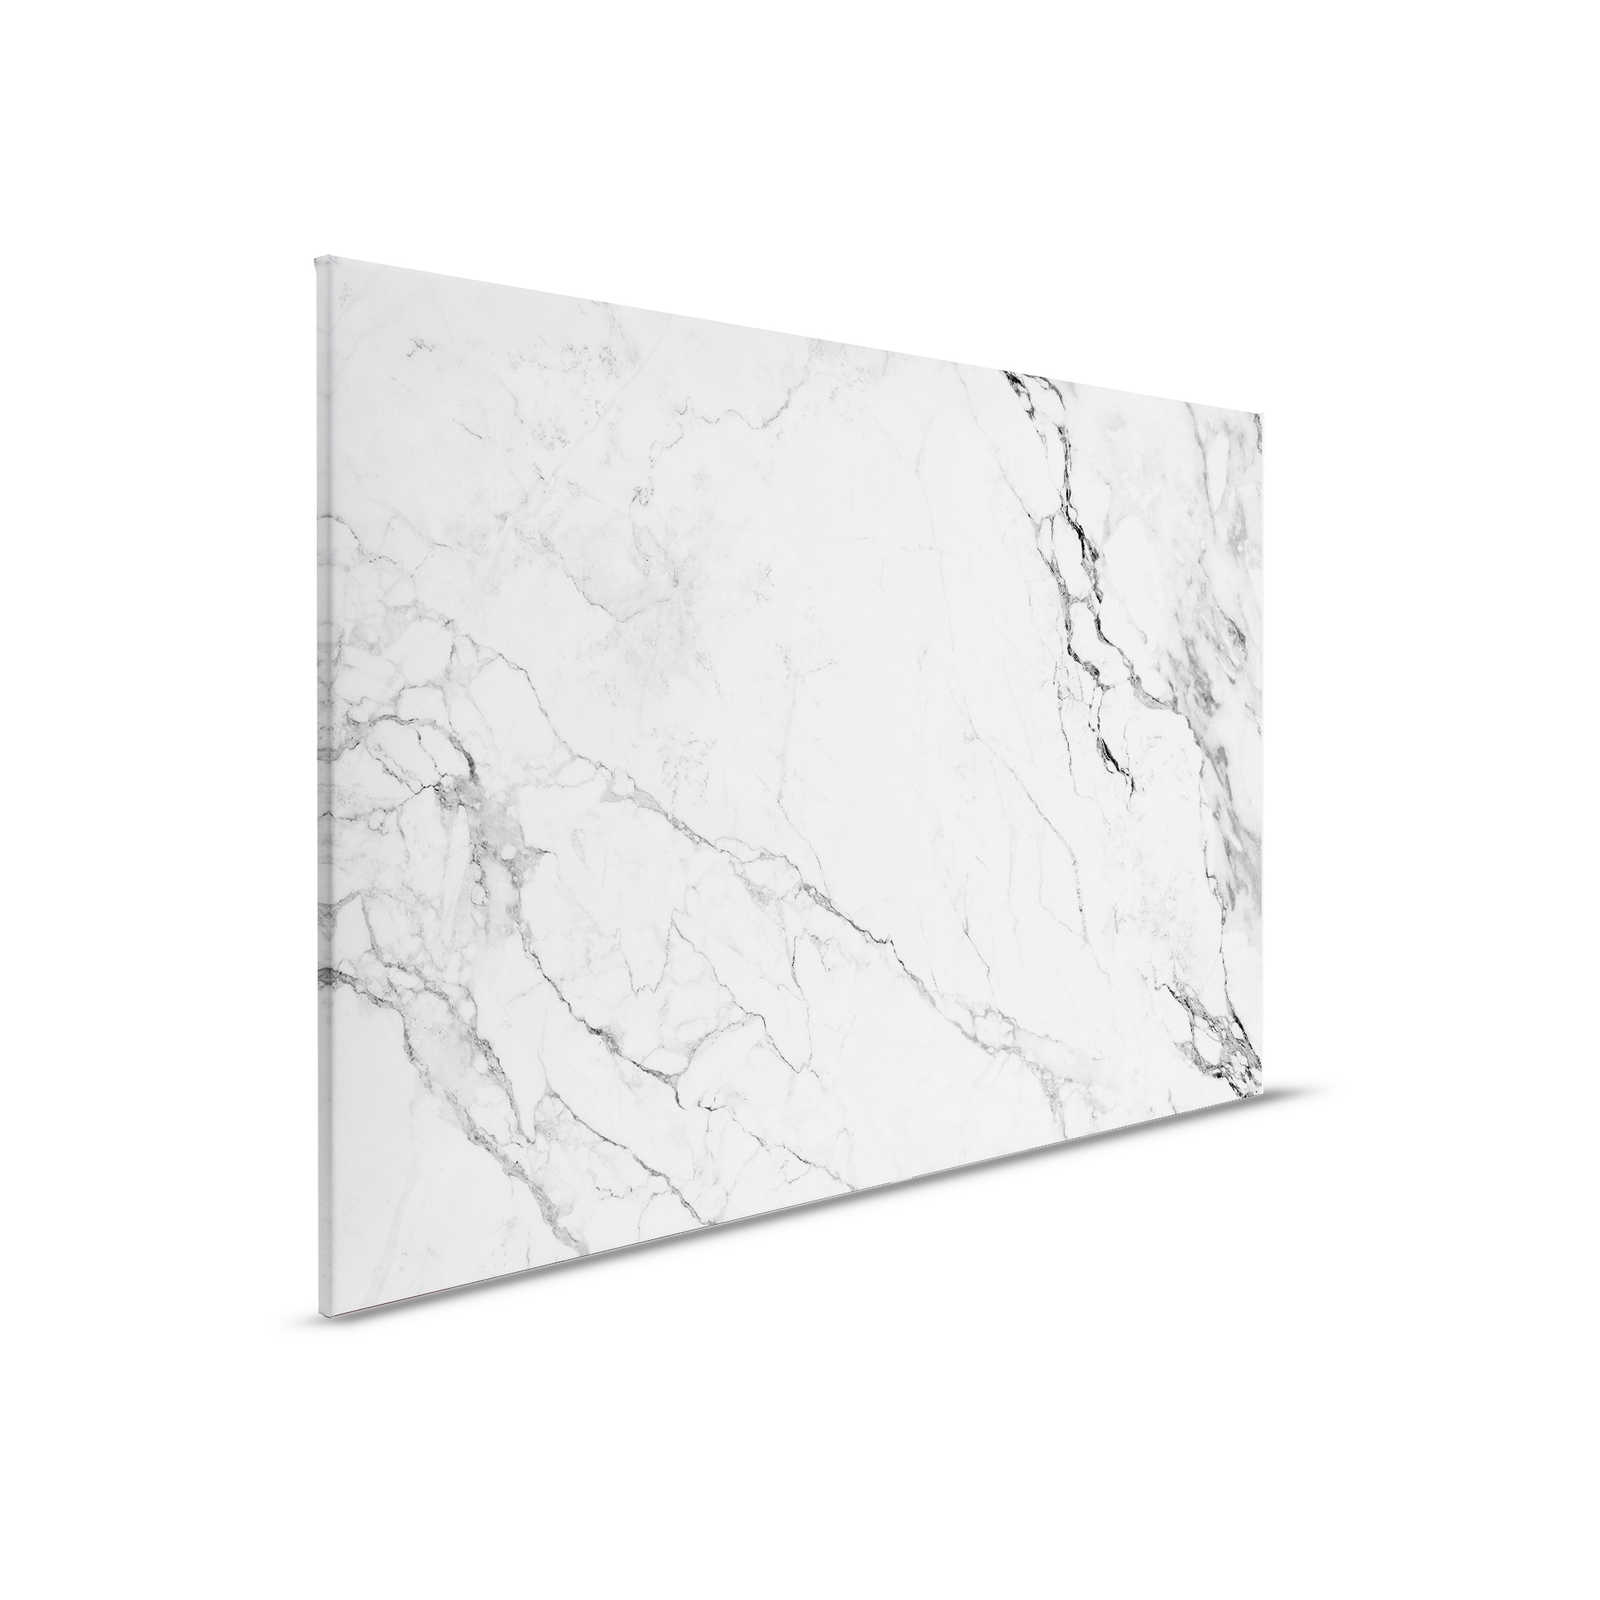         Canvas painting with modern marble look - 0.90 m x 0.60 m
    